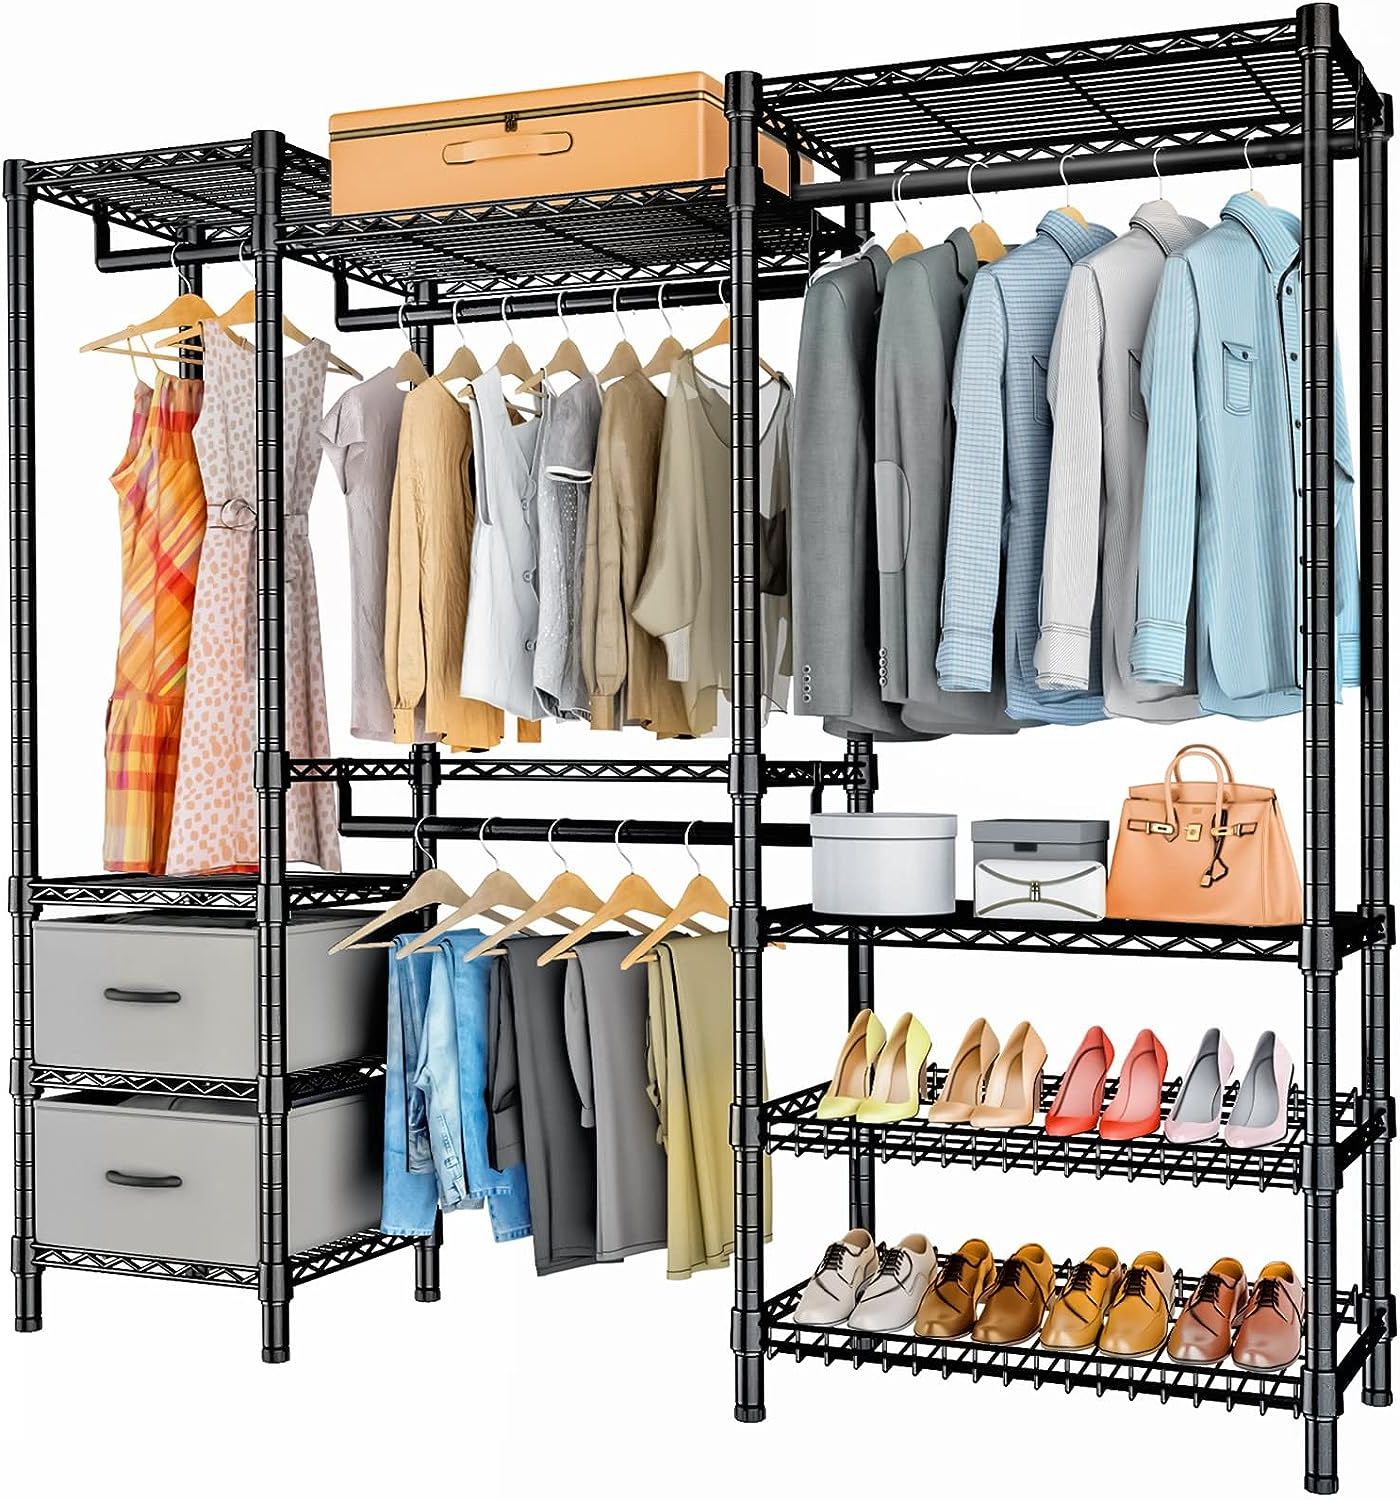 Vipek V8 Wire Garment Rack 5 Tiers Heavy Duty India | Ubuy With 5 Tiers Wardrobes (View 16 of 20)